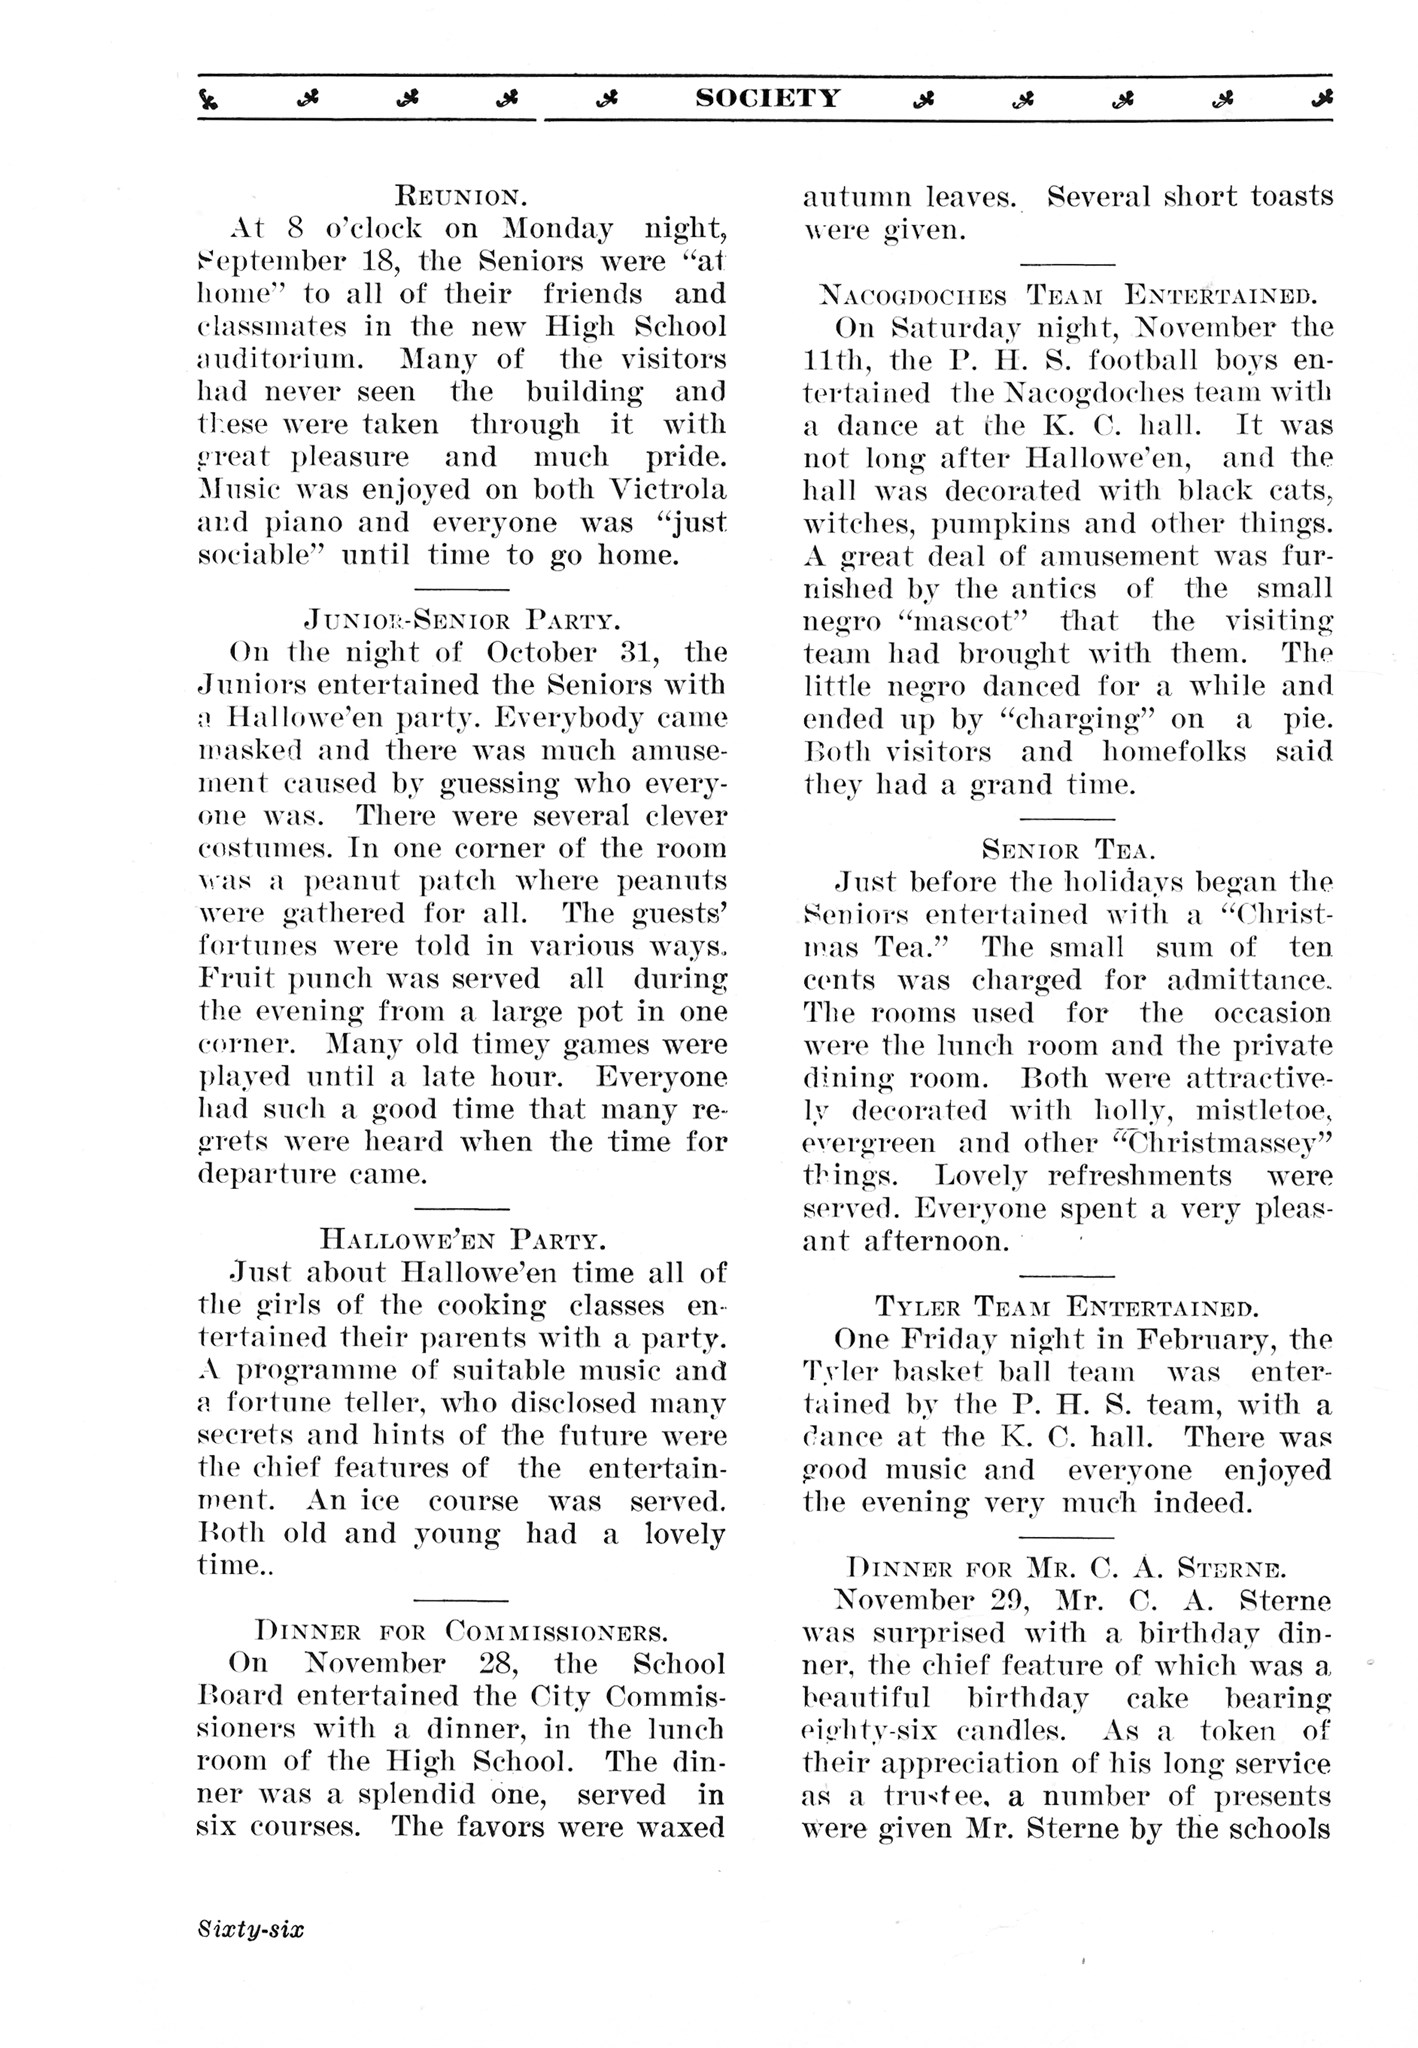 ../../../Images/Large/1917/Arclight-1917-pg0066.jpg